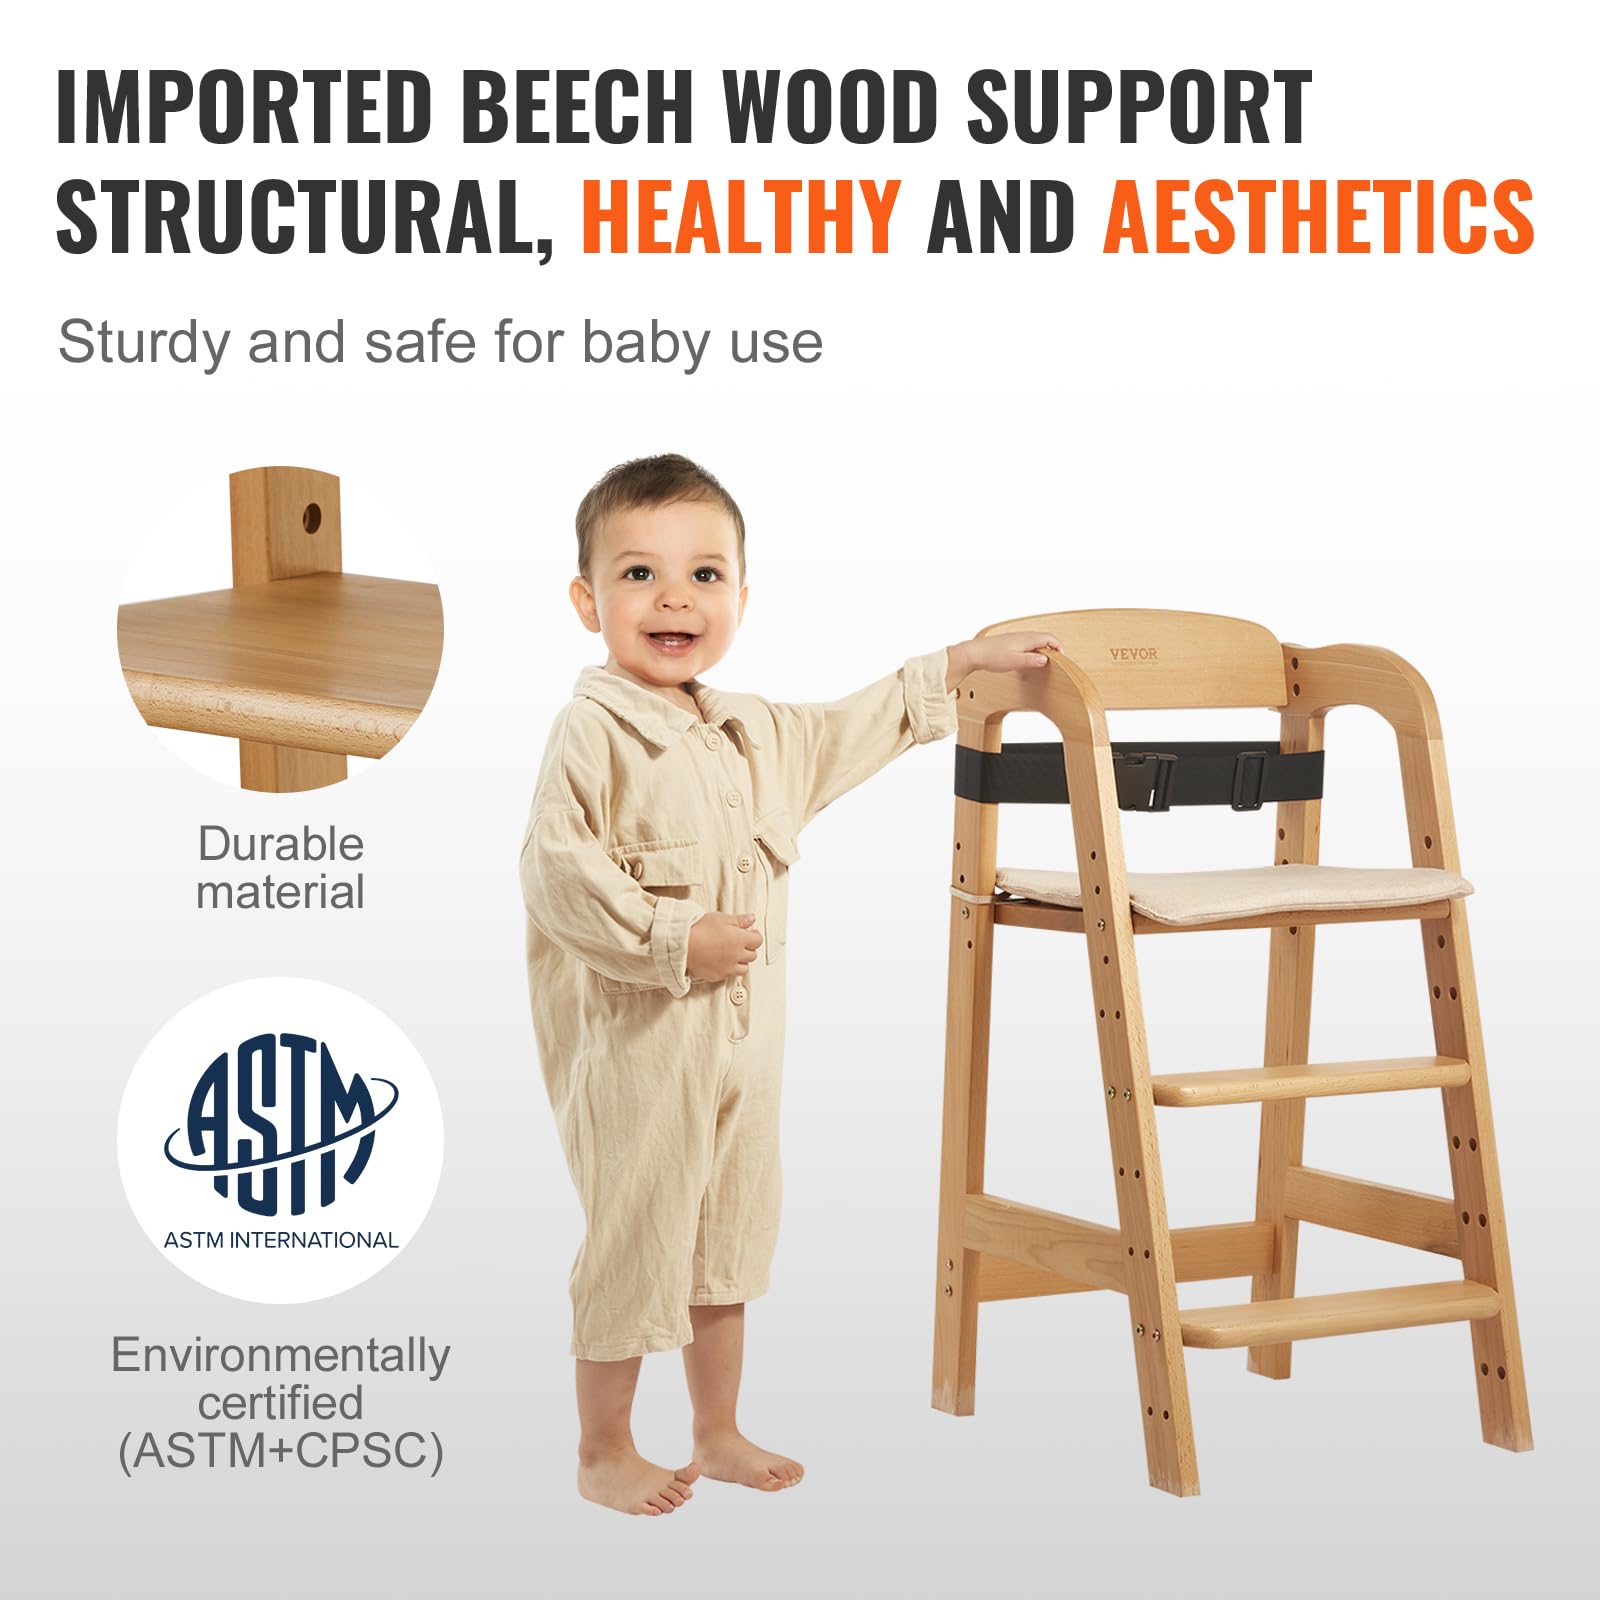 VEVOR Wooden Convertible Adjustable Feeding, Eat & Grow High Cushion, Portable Baby Dining Booster Seat, Beech Wood Toddler Chair, Natural